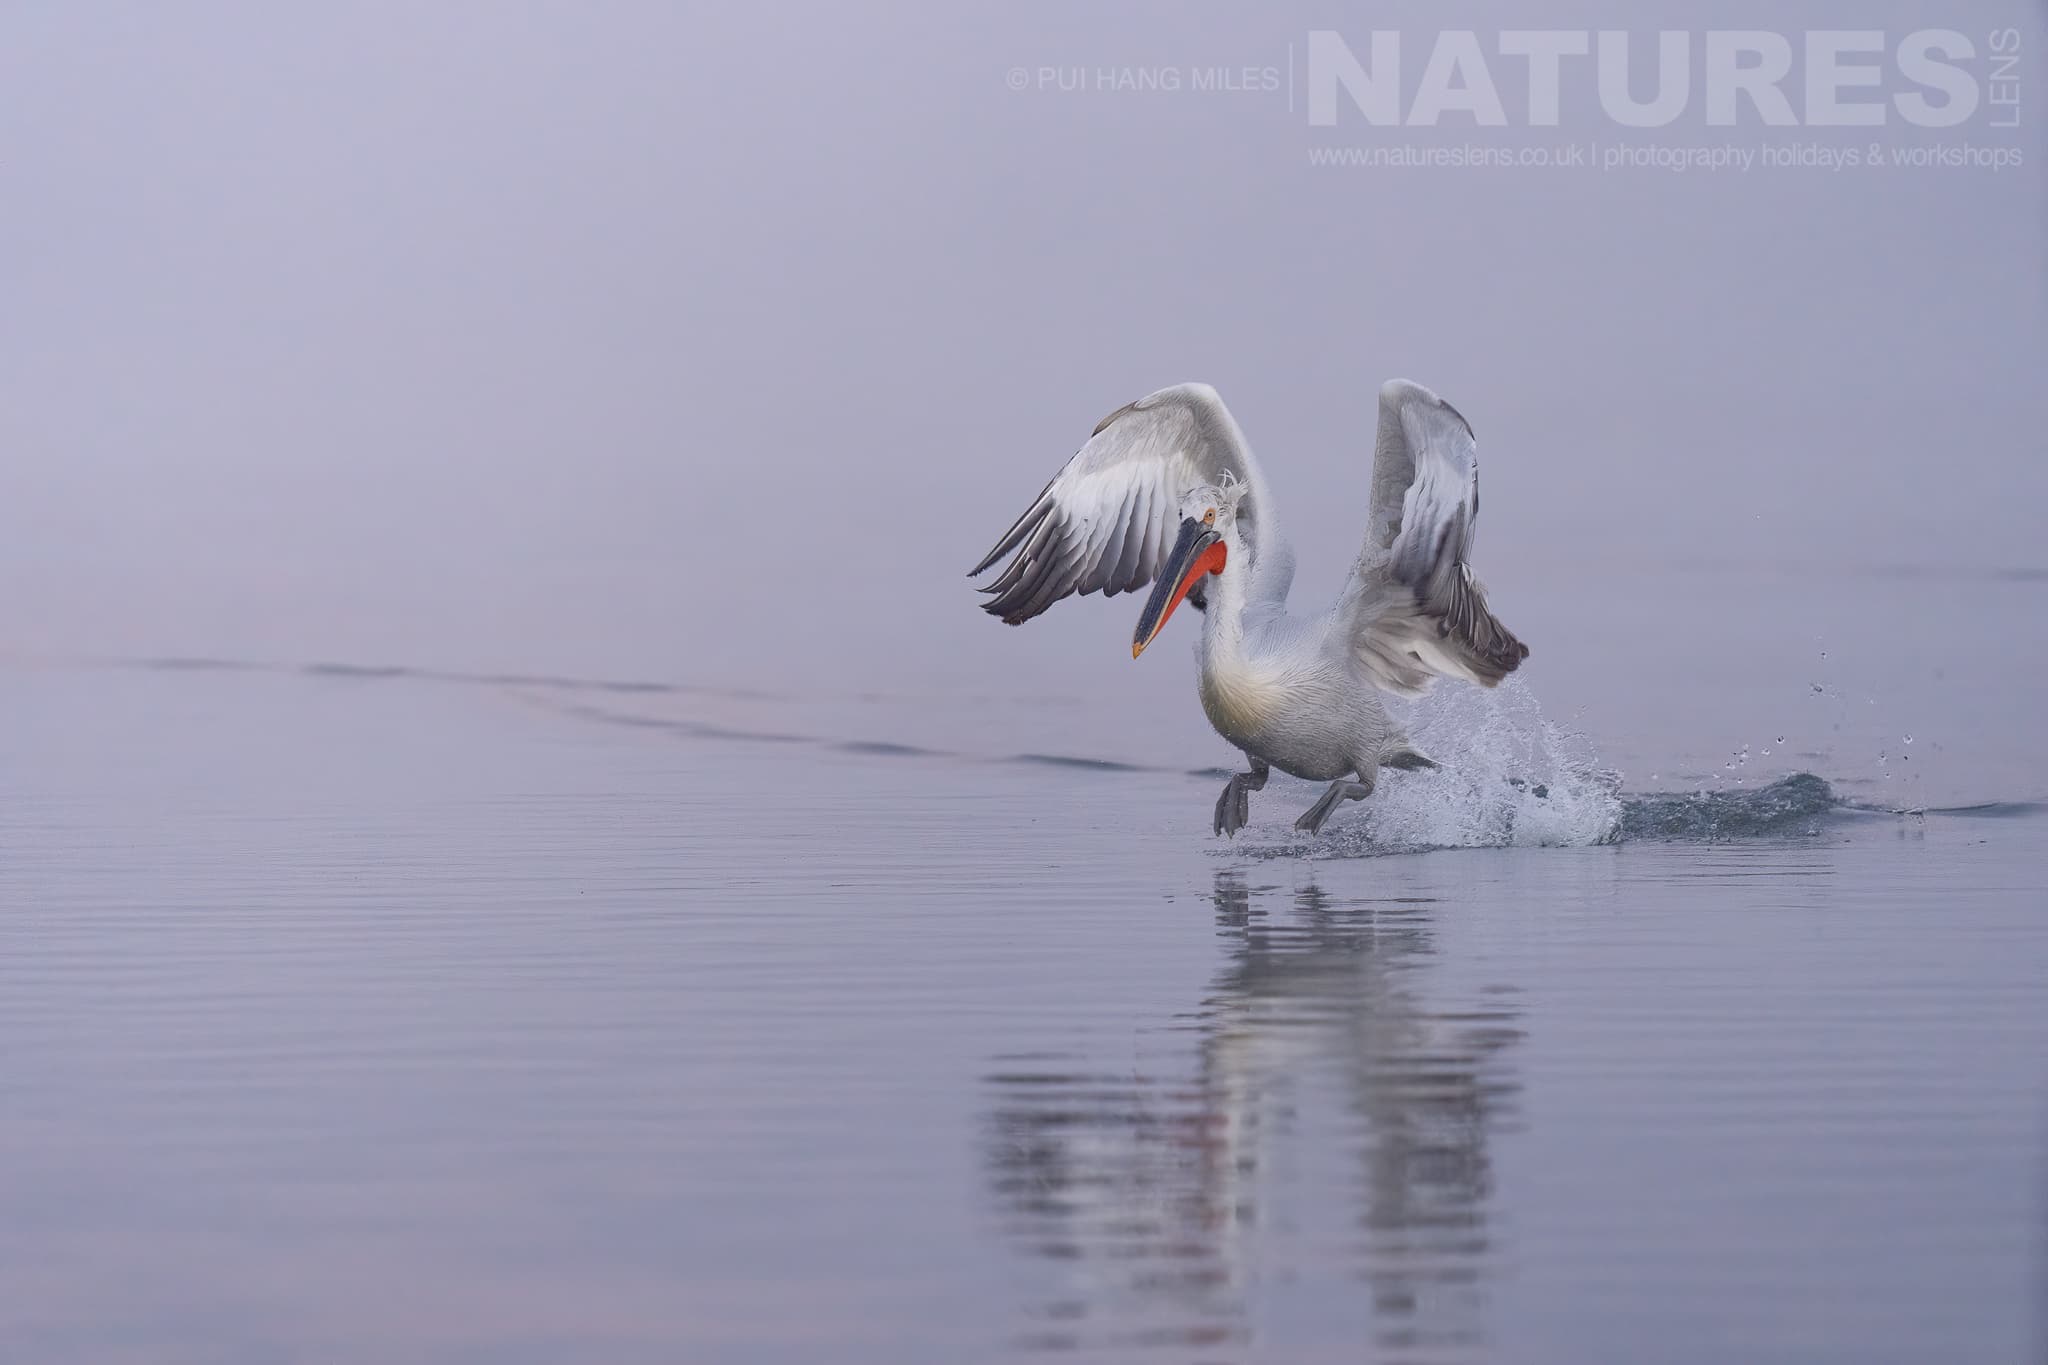 One Of The Pelicans Of Lake Kerkini Makes A Splash As It Lands On The Waters Of The Lake Photographed During A Natureslens Pelicans Of Lake Kerkini Photography Holiday